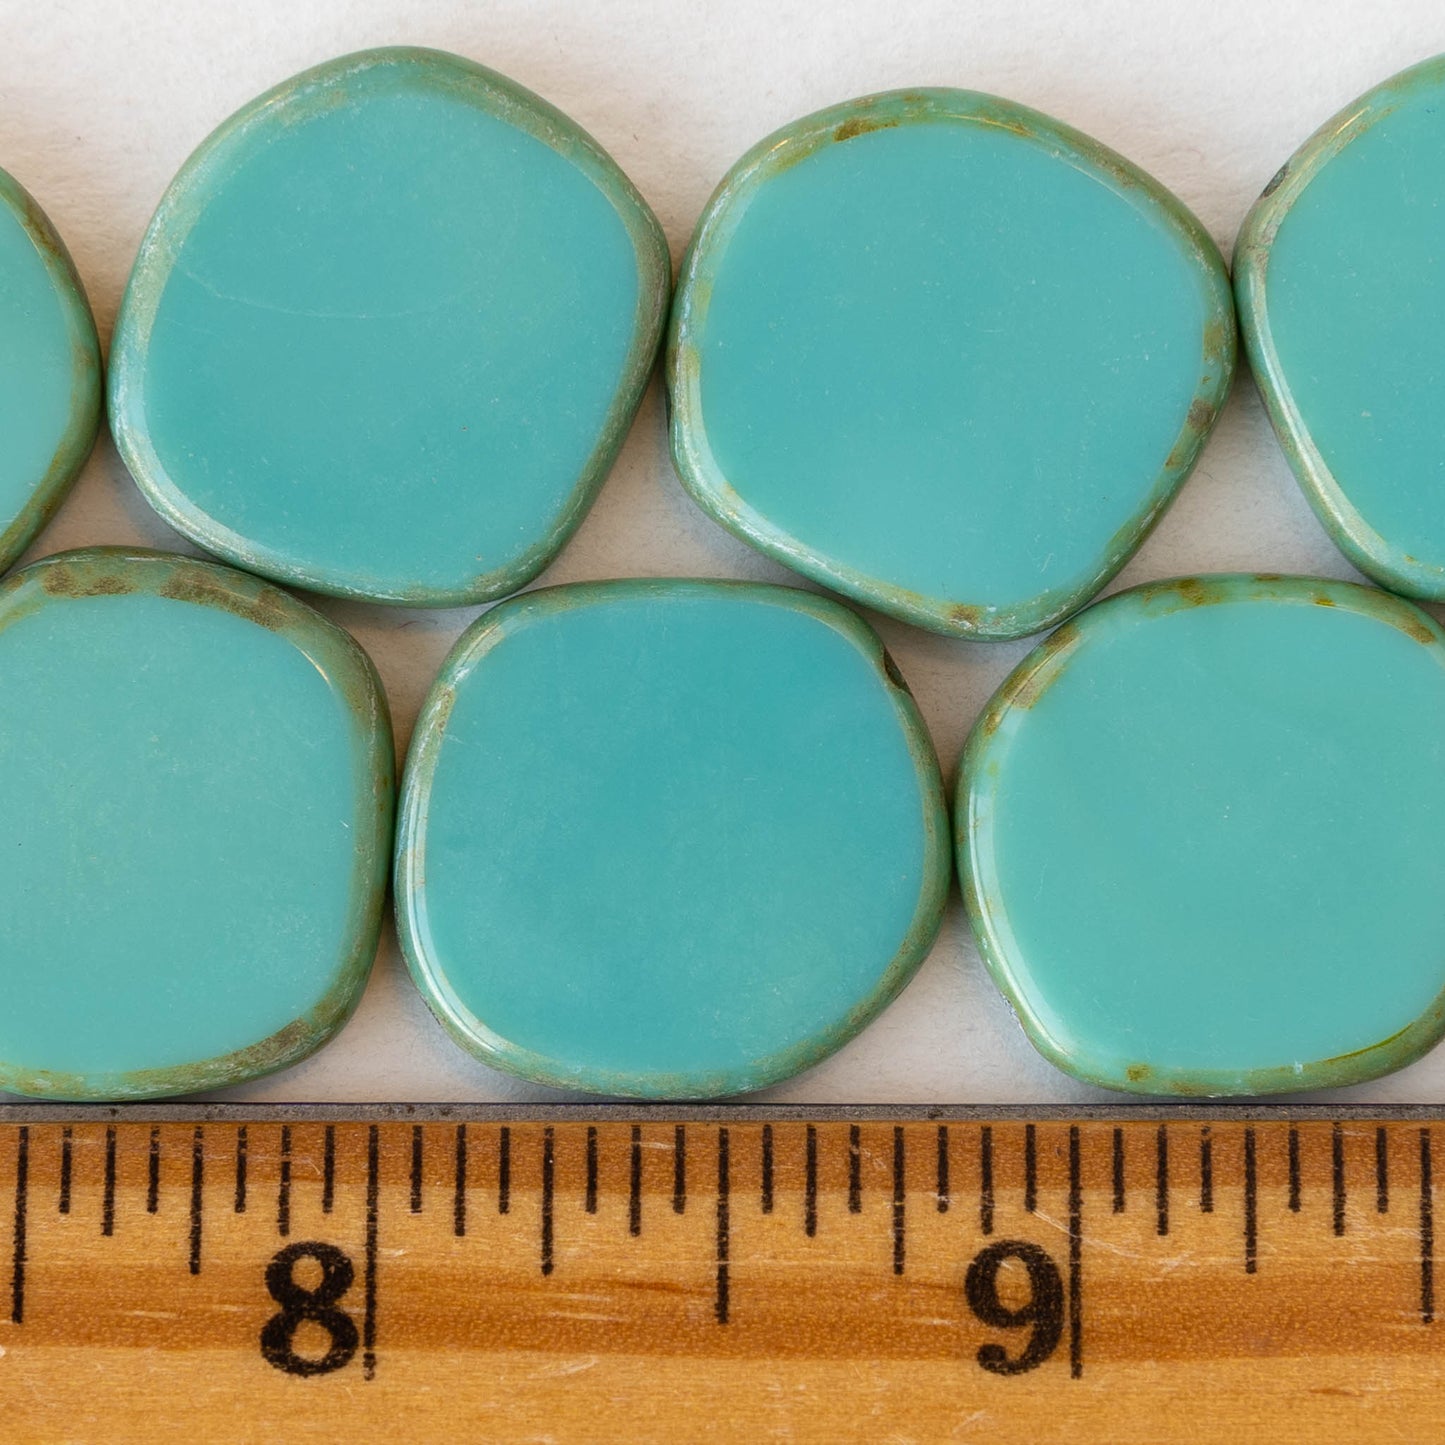 22mm Irregular Coin Beads - Opaque Turquoise Picasso - 6 or 12 Beads